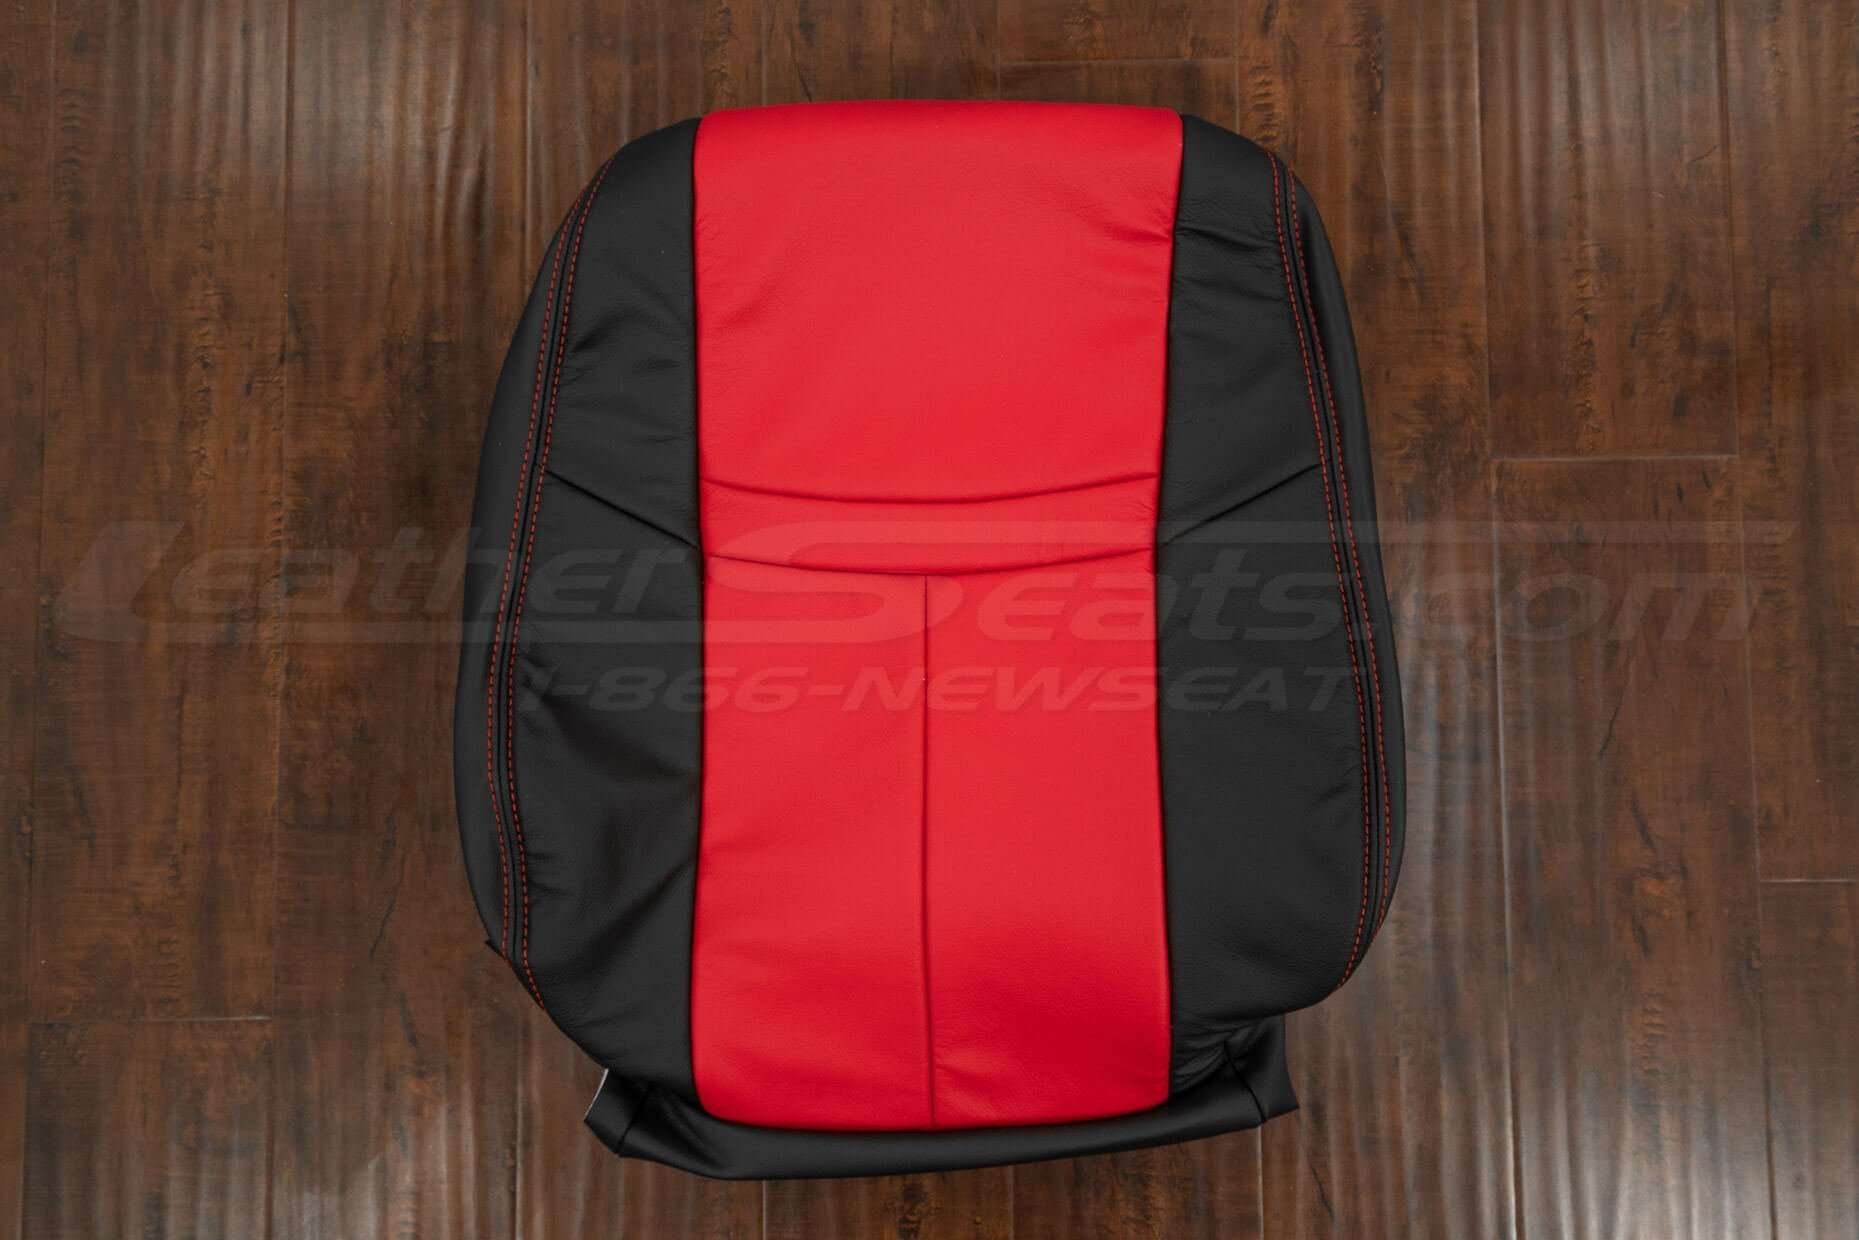 Black and Bright Red backrest uphlstery for Nissan Rogue SUV